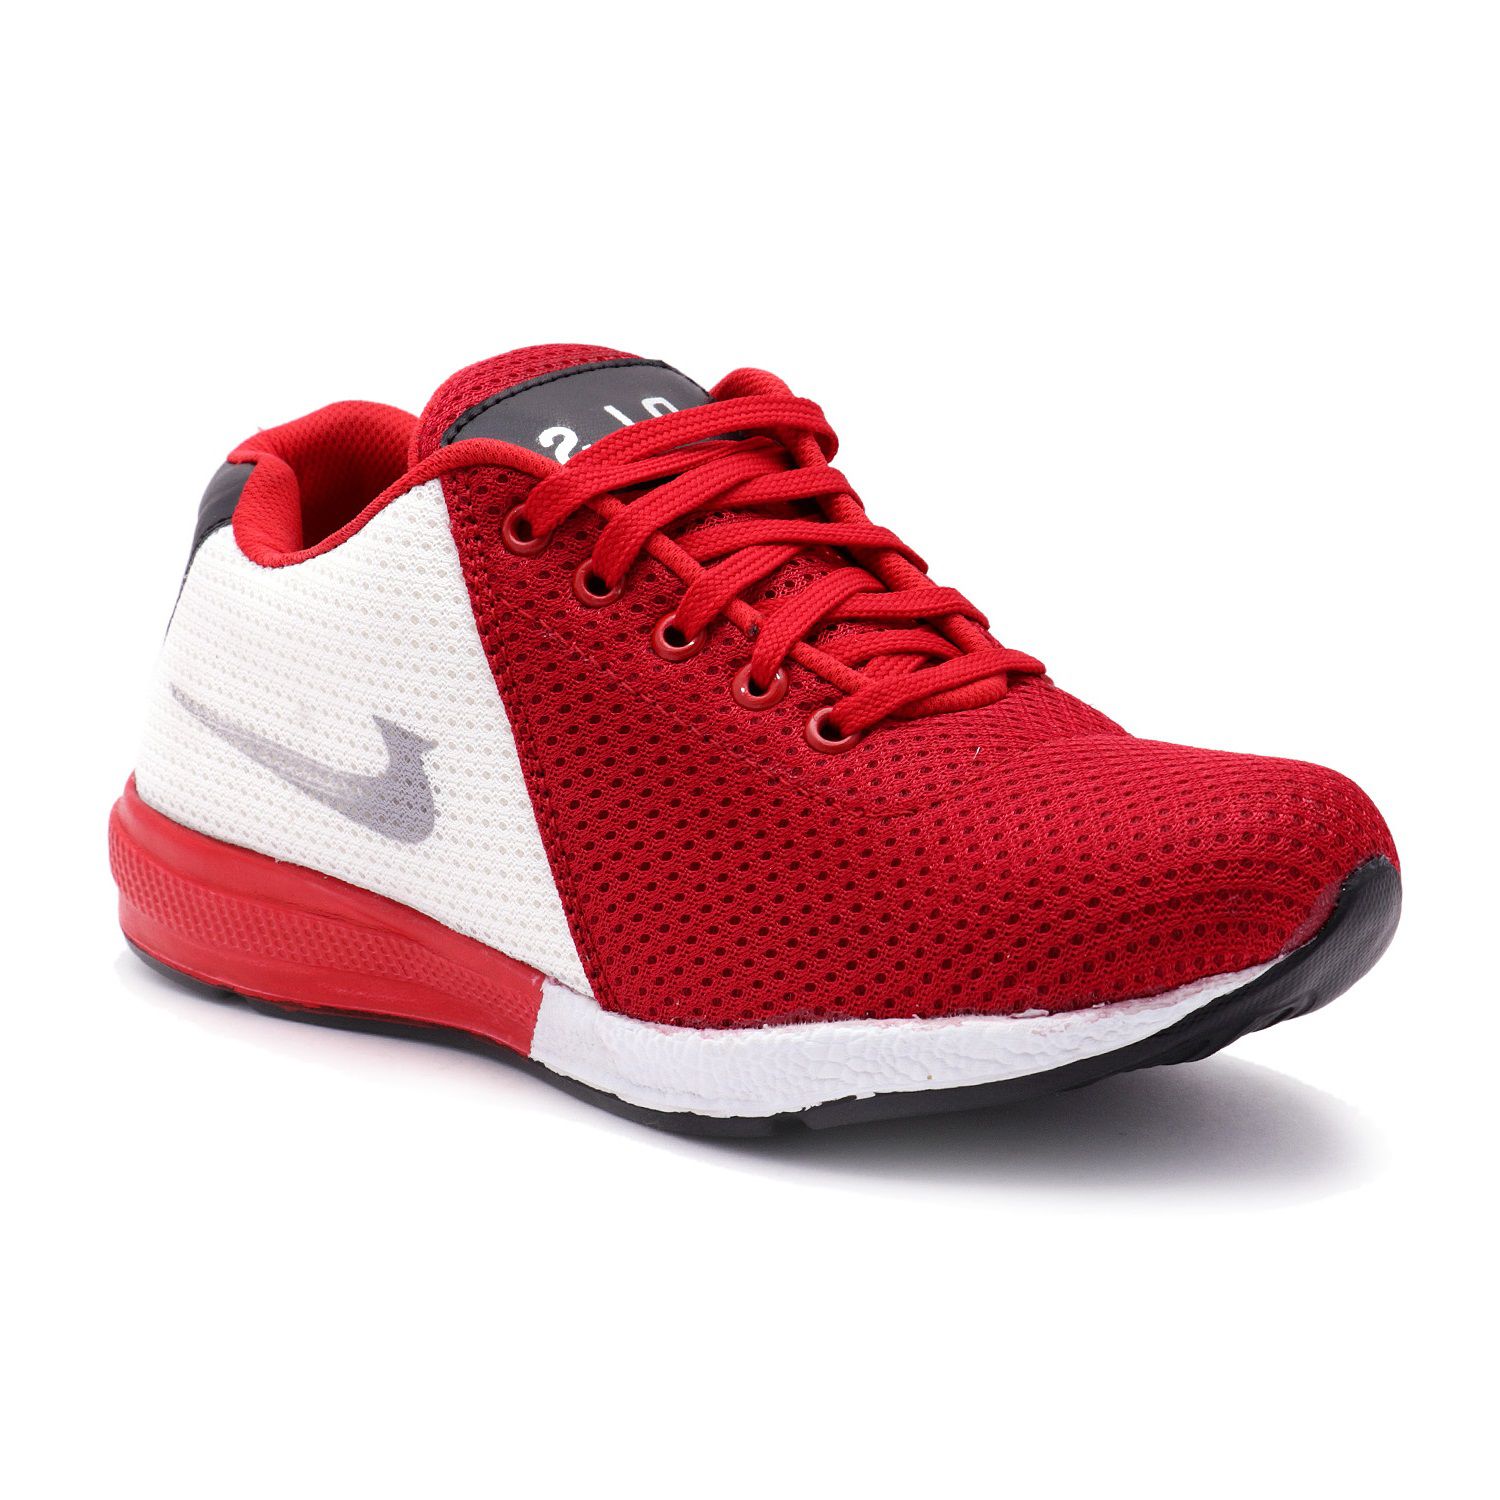 DLS NA Running Shoes Red: Buy Online at Best Price on Snapdeal